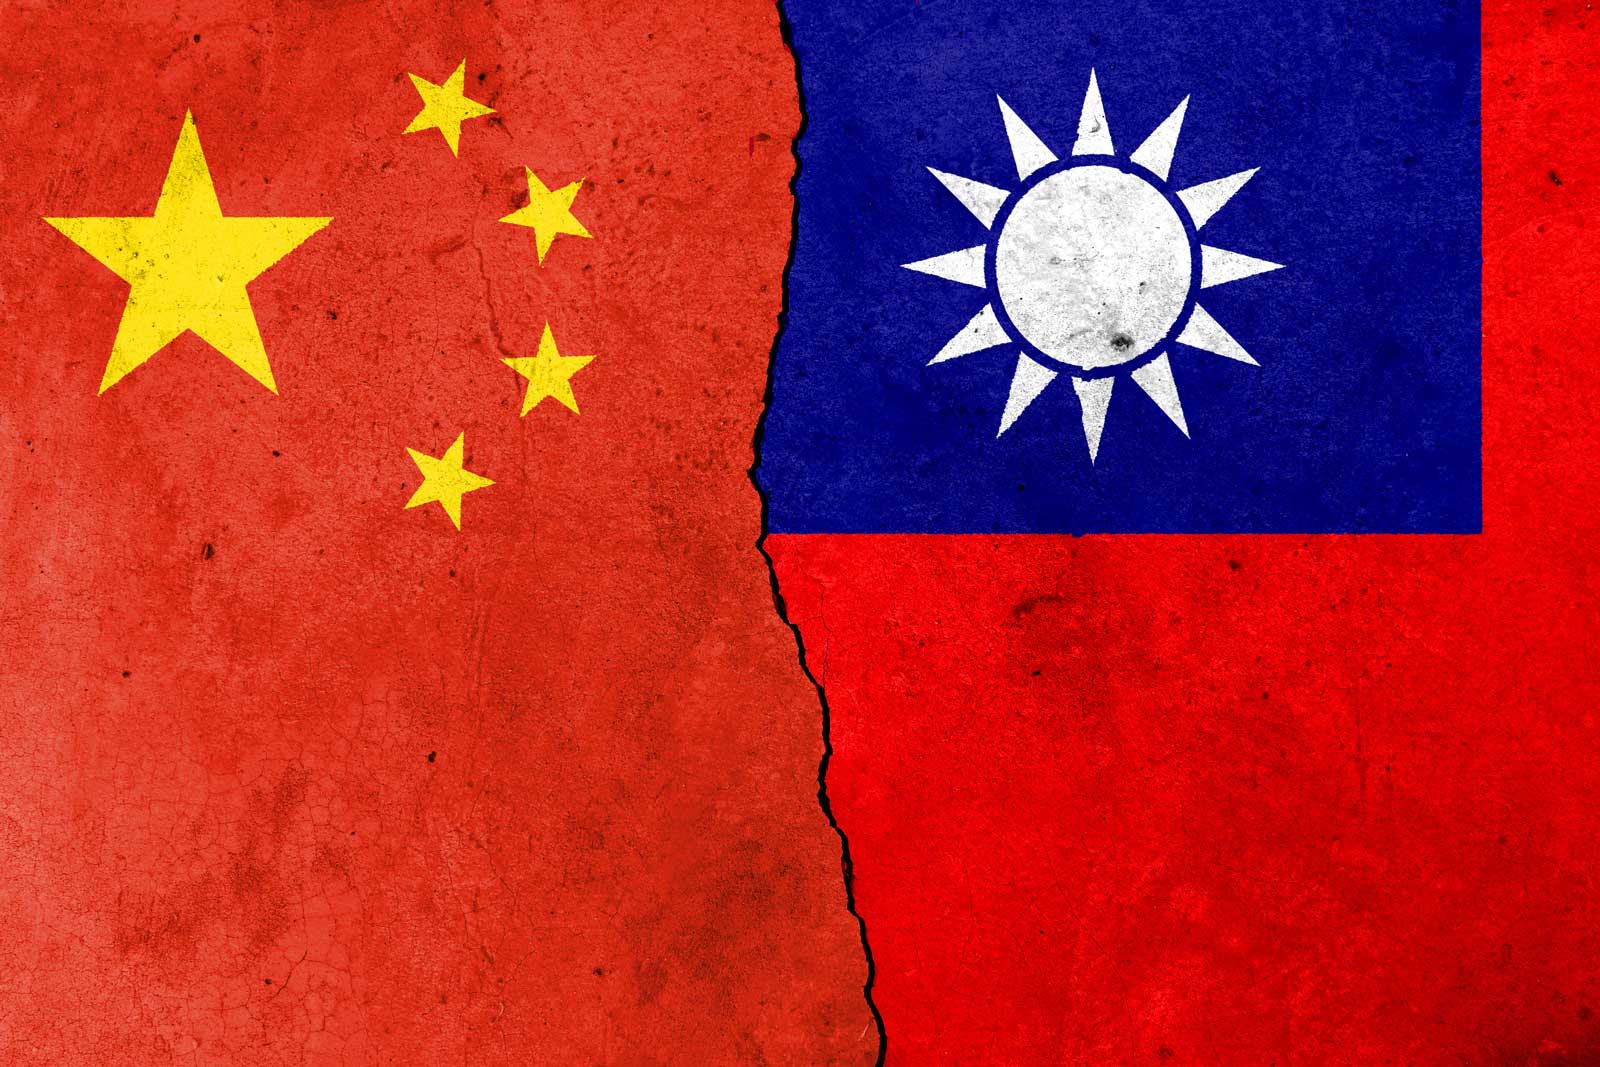 China vs. Taiwan: The battle for diplomatic allies